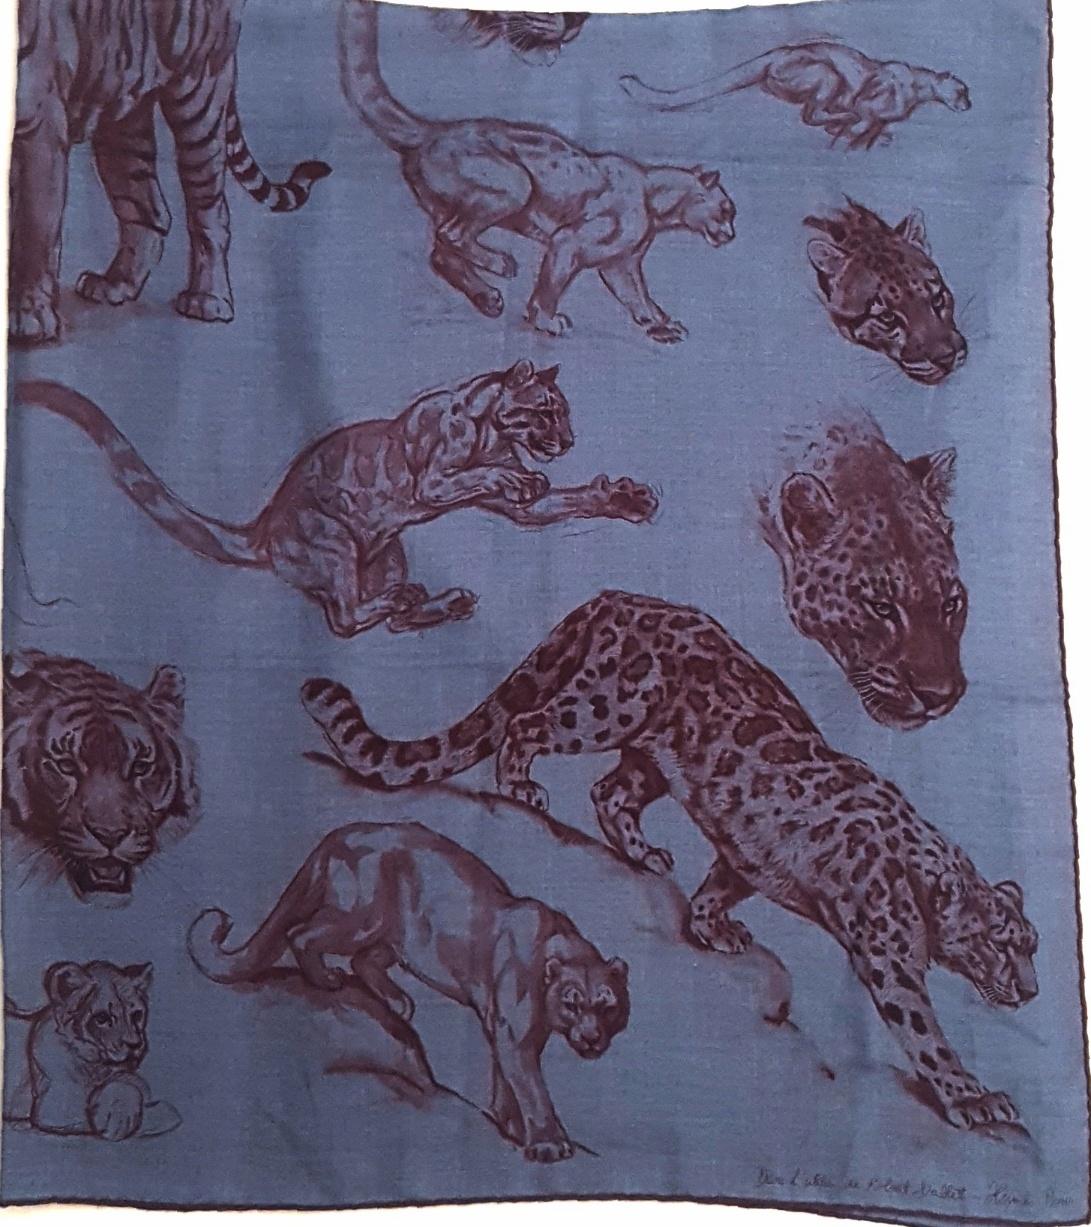 Hermès scarf Dans L'atelier de Robert Dallet is a vivid description of a sketchbook page from the world’s most fearsome figure drawing class, is filled with pencil studies of big cats, such as, leopards and tigers and cougars. Made of 70% cashmere